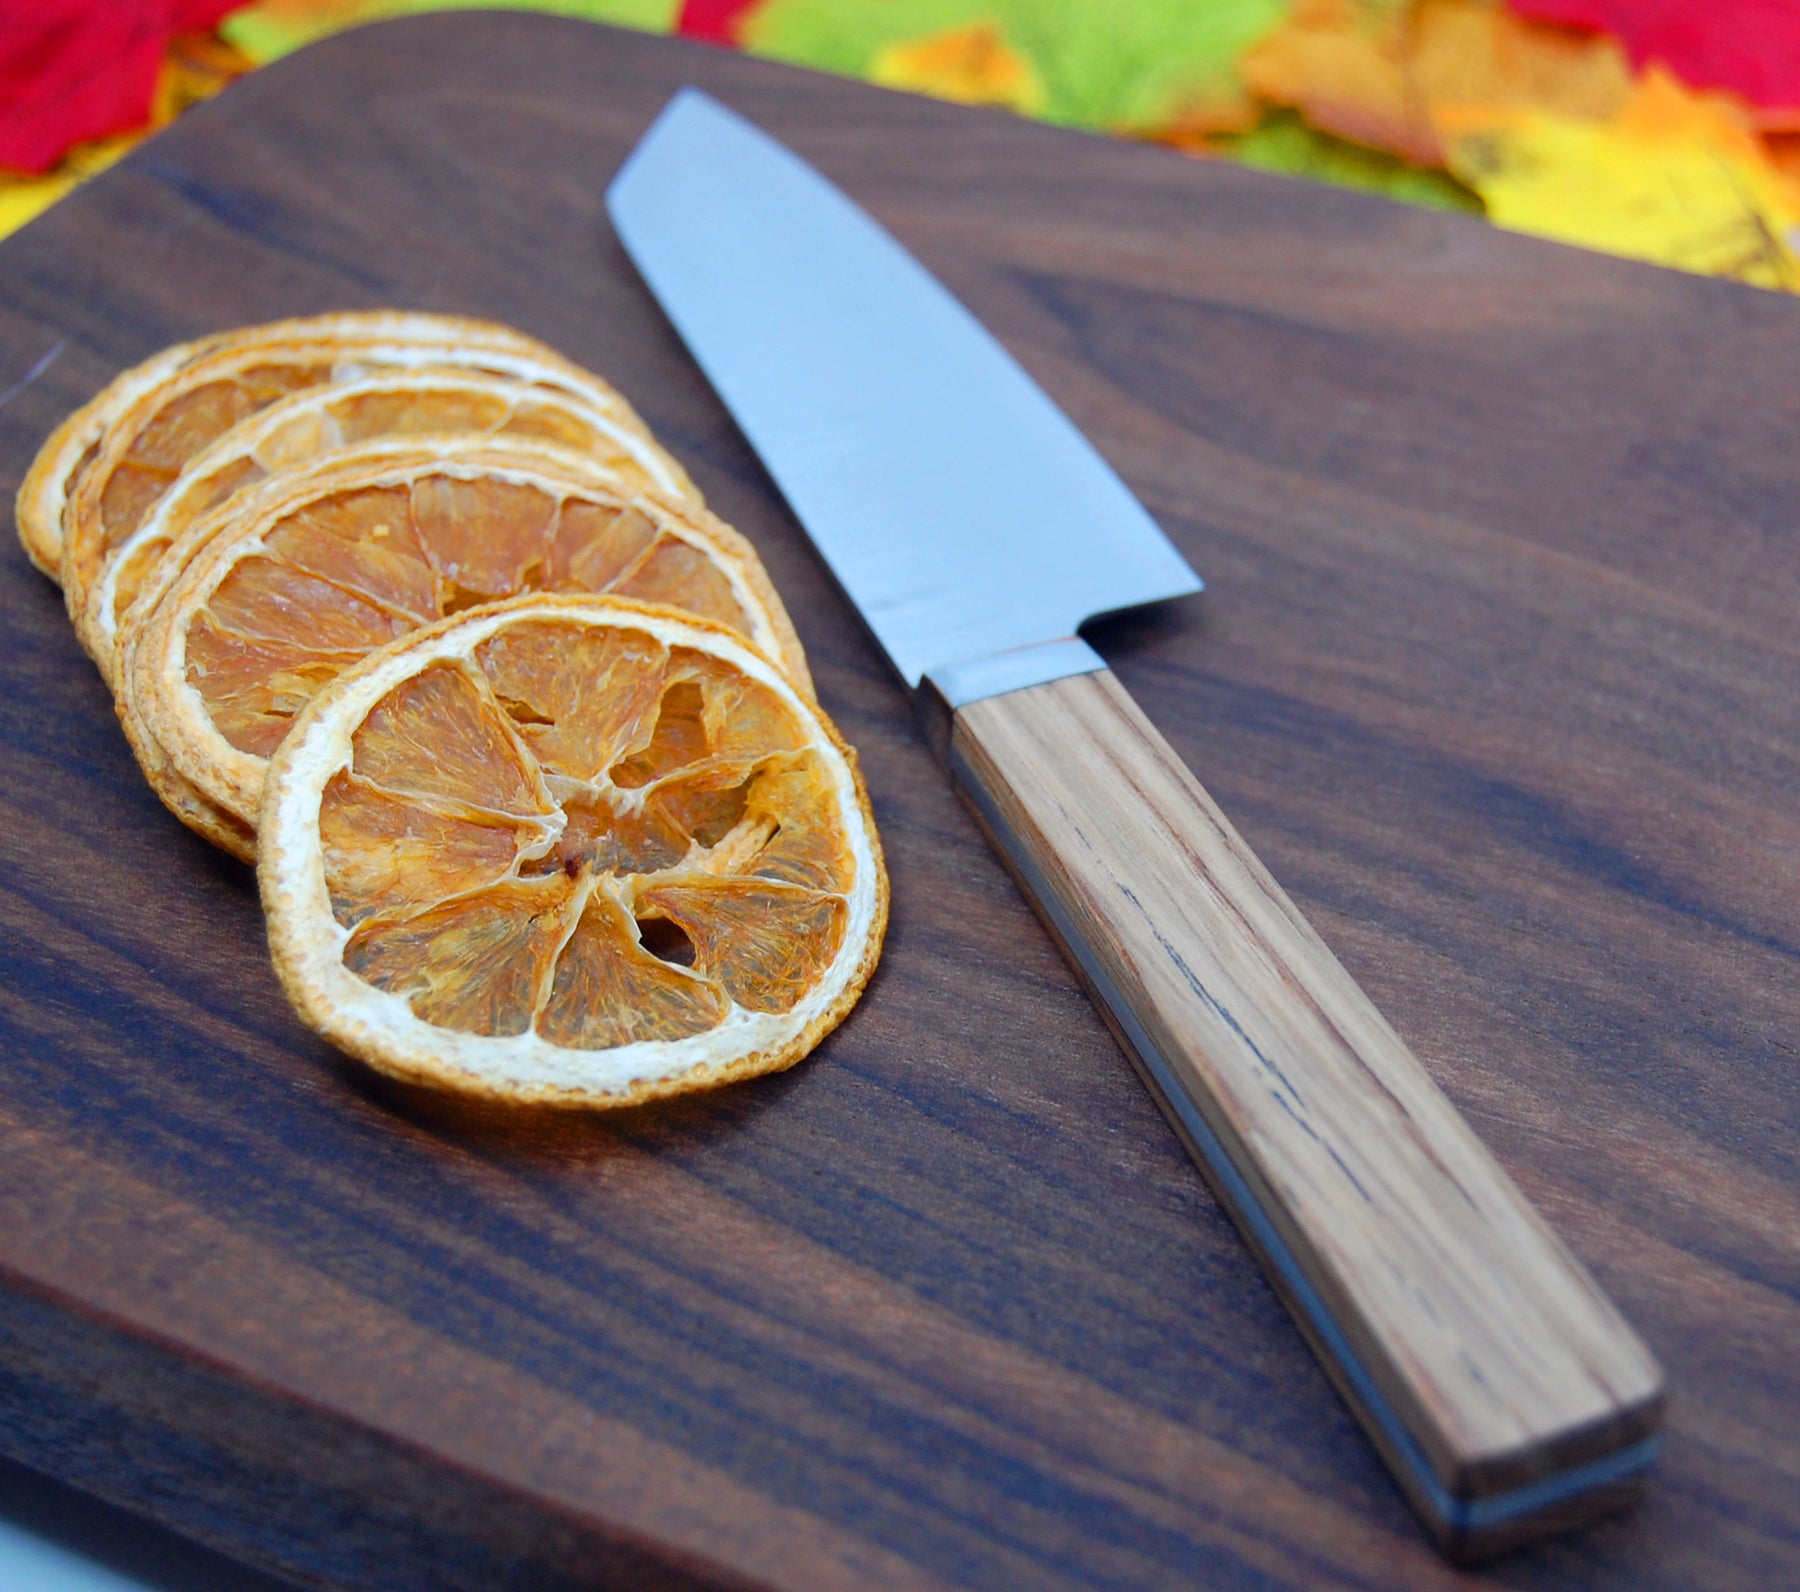 BUILD YOUR OWN CHEF'S KNIFE EXPERIENCE GIFT CERTIFICATE - Minter and Richter Designs